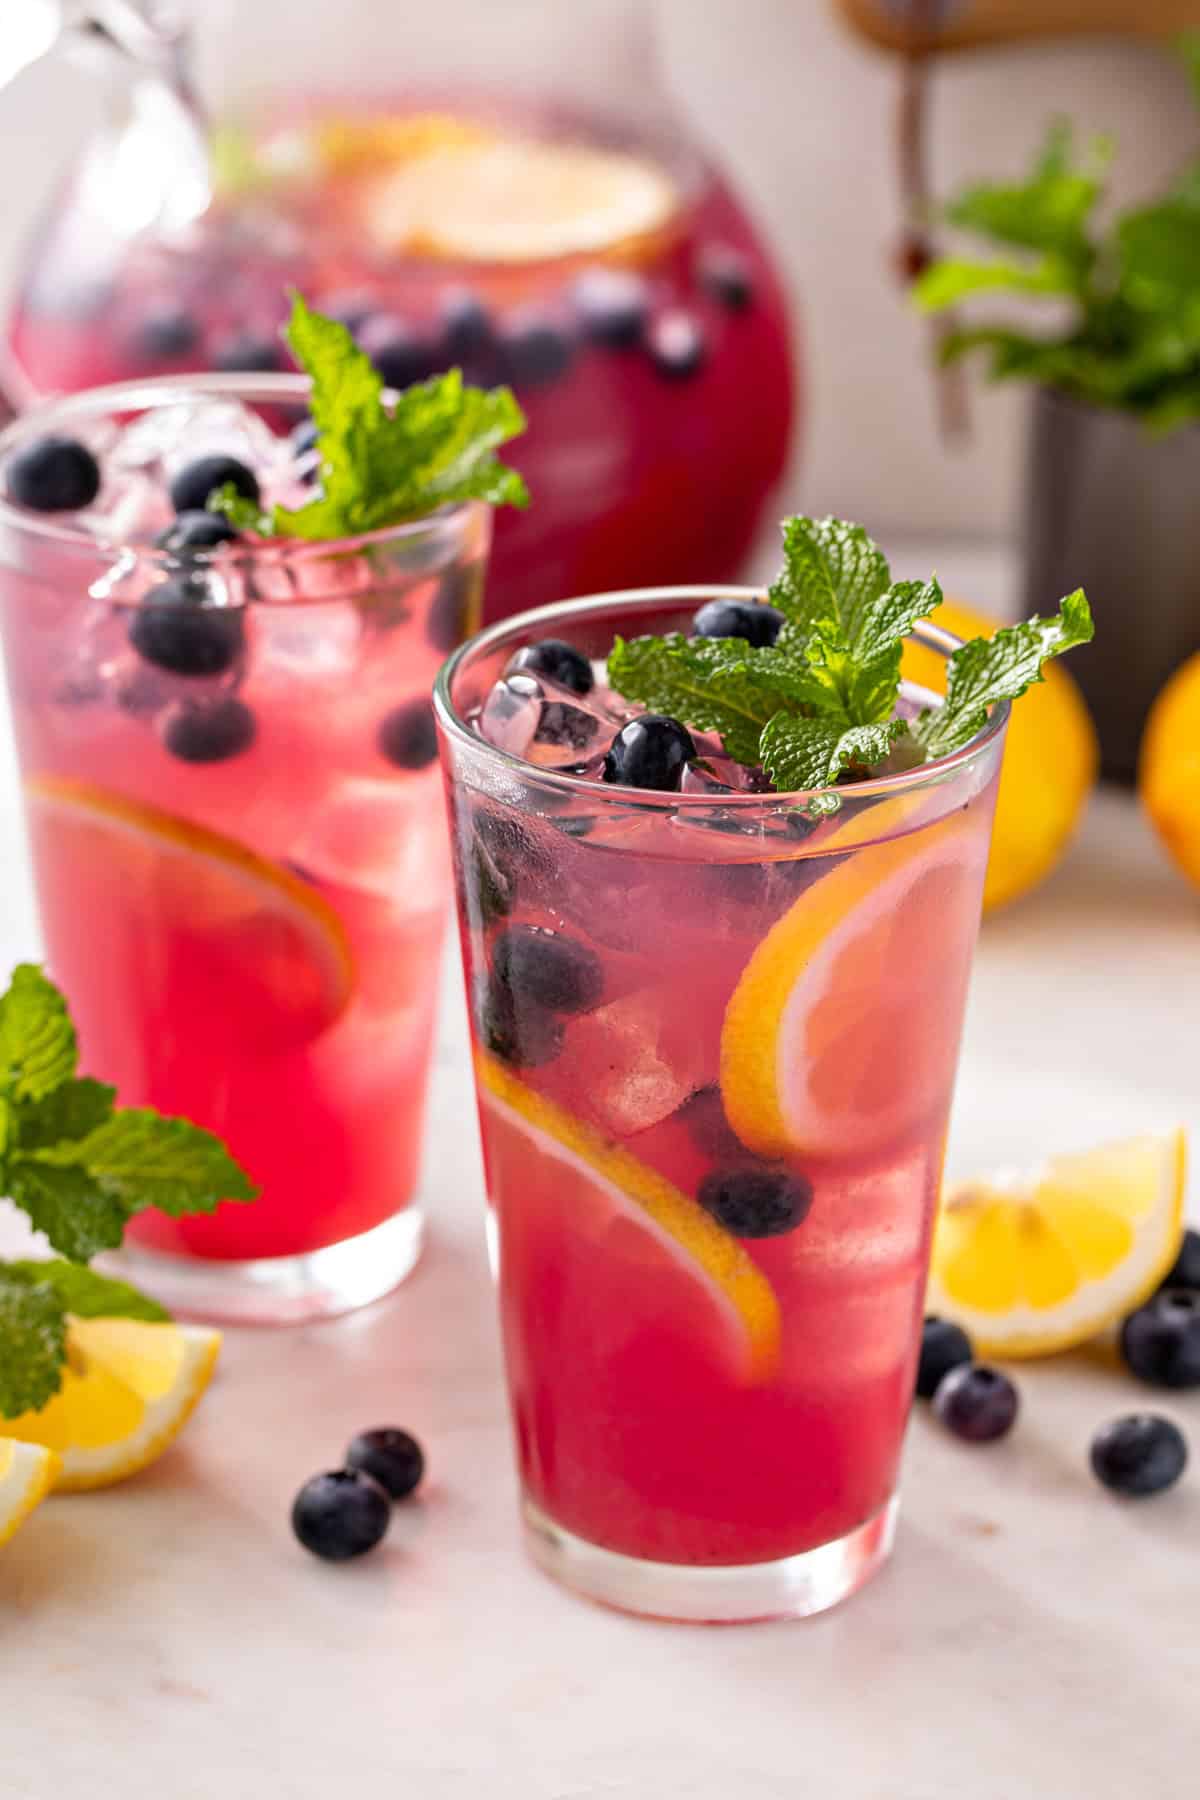 Two glasses of blueberry lemonade on a countertop with lemon wedges and fresh blueberries.